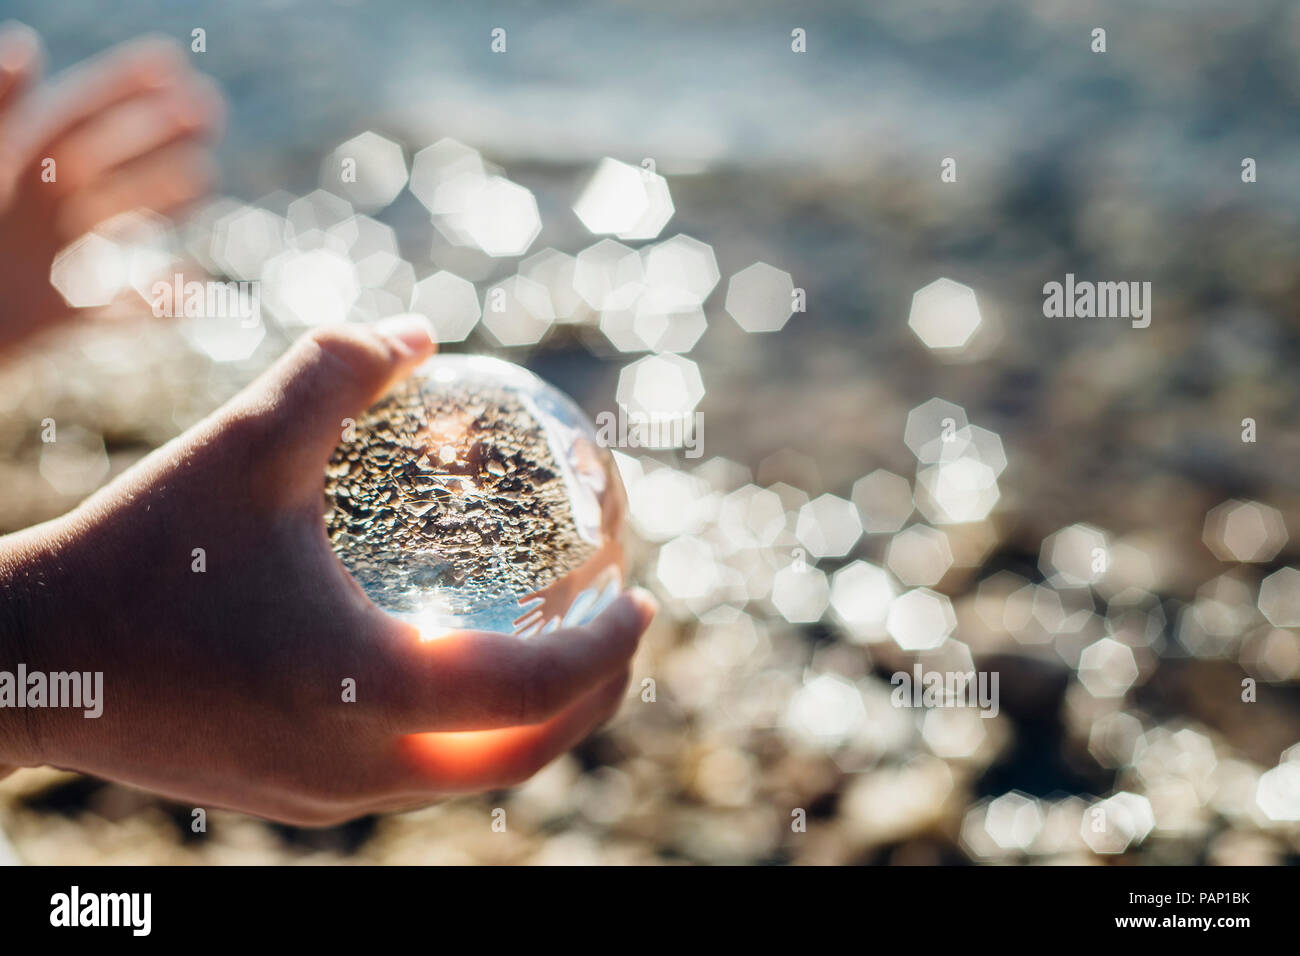 Boy's hand holding tansparent sphere at a lake Stock Photo